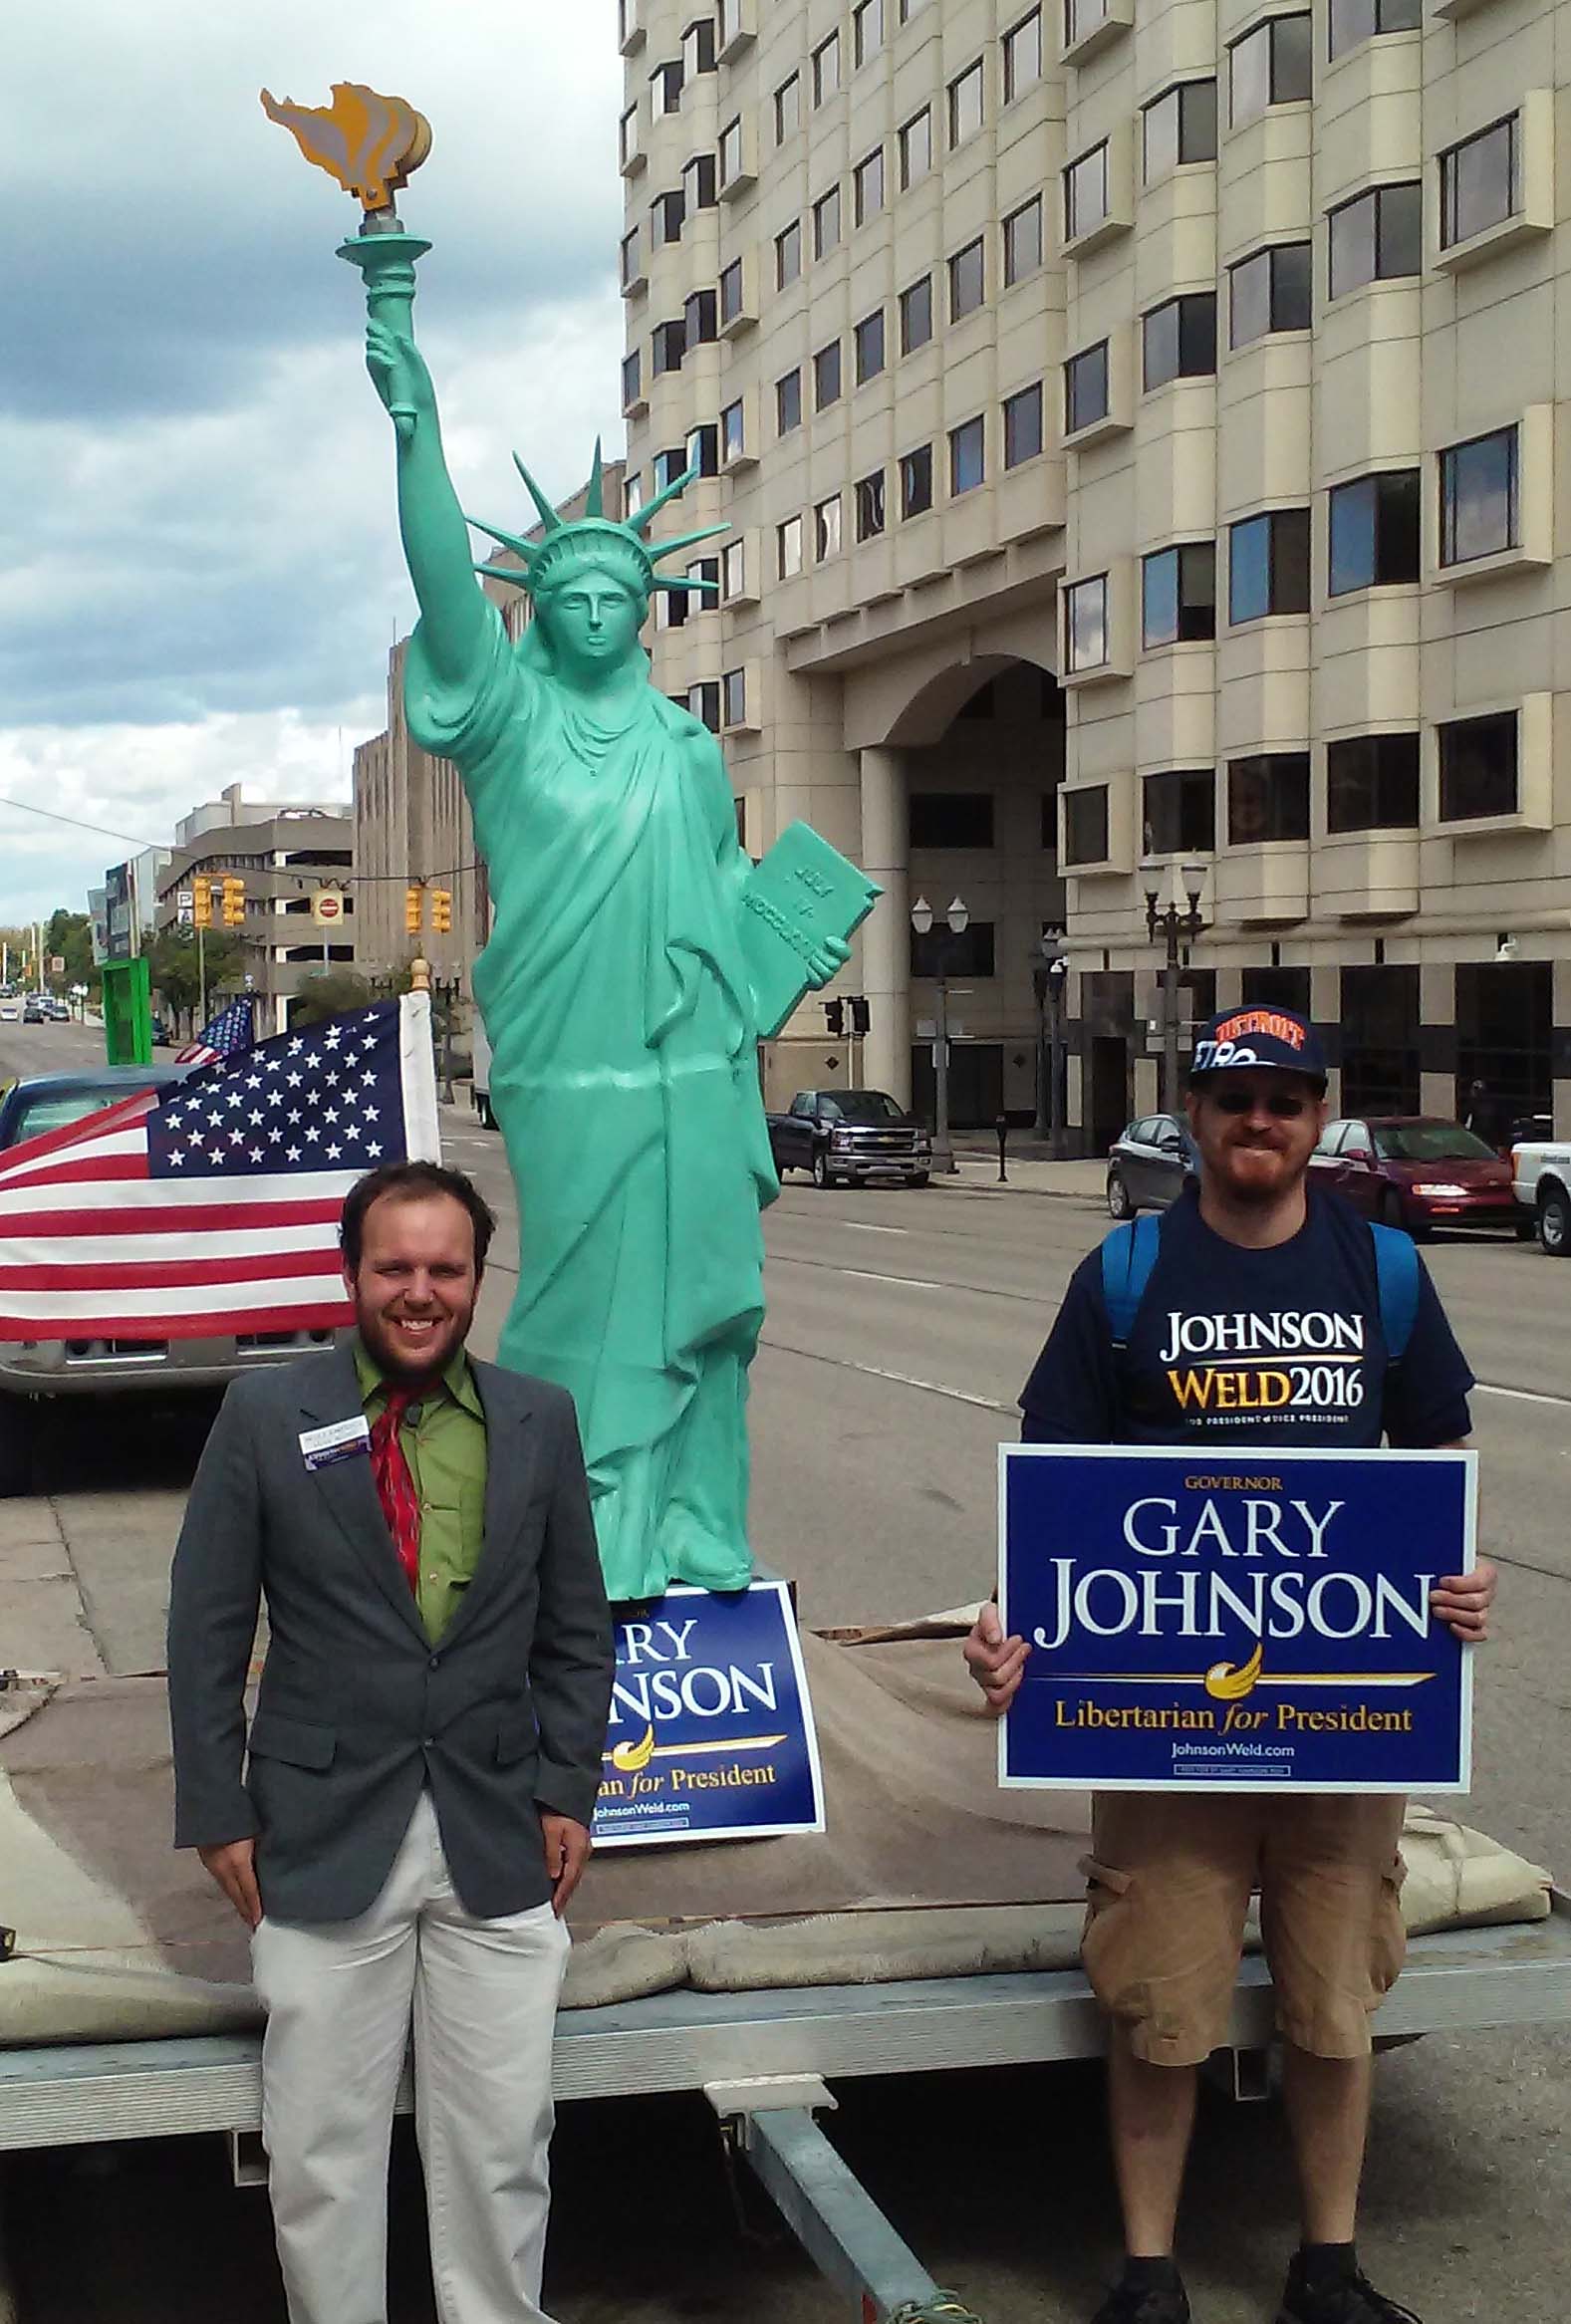 State House Candidate Logan Fleckenstein and Liberty activist at Fair Debate protest